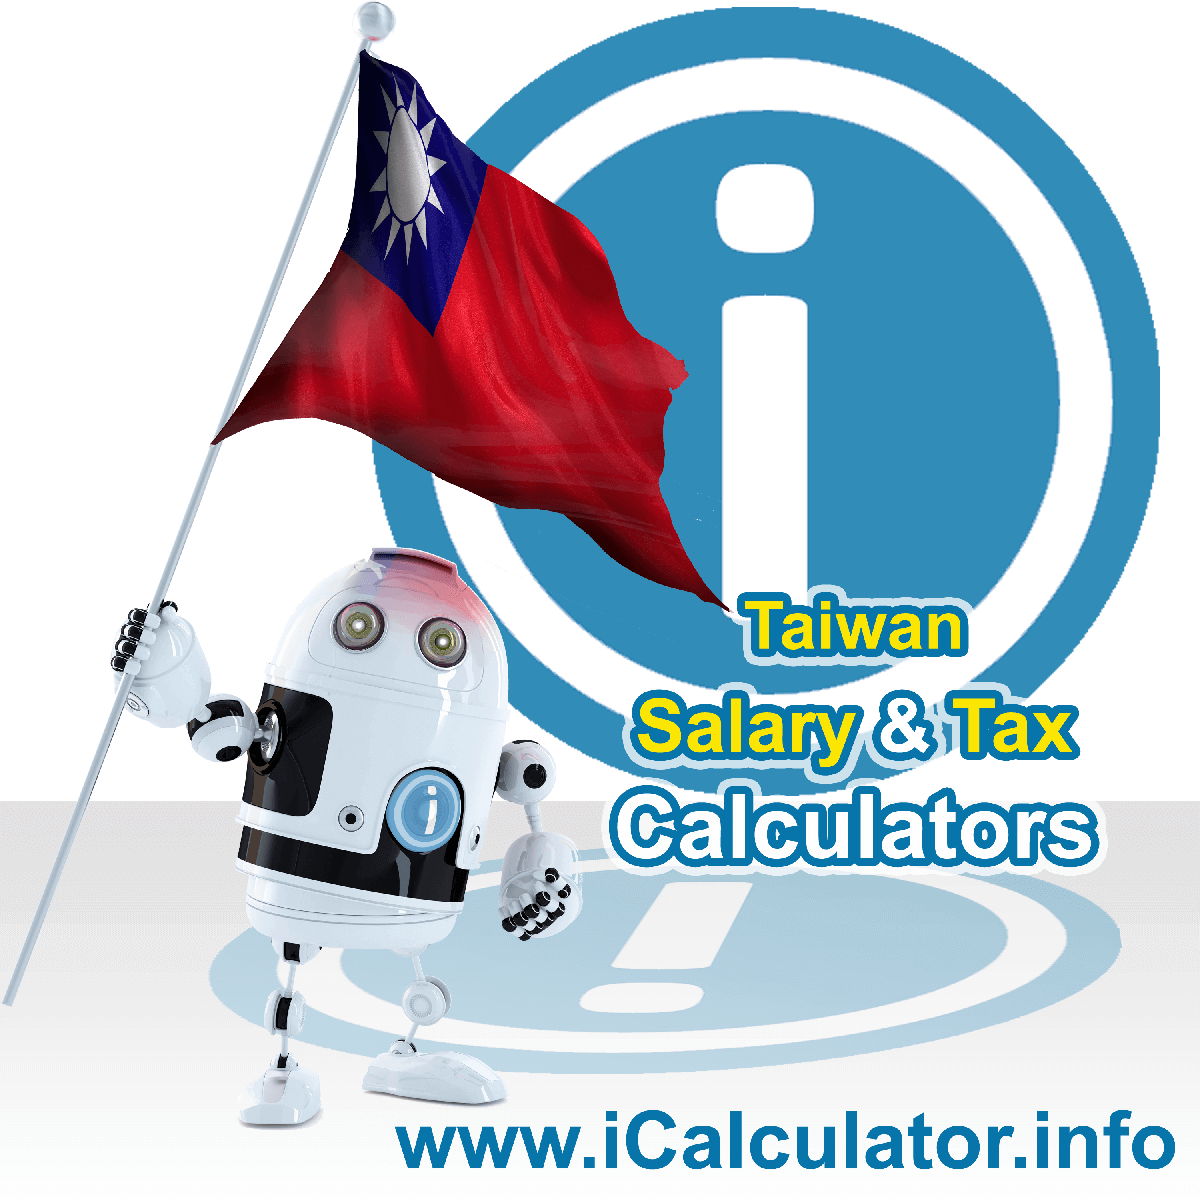 Taiwan Salary Calculator. This image shows the Taiwanese flag and information relating to the tax formula for the Taiwan Tax Calculator